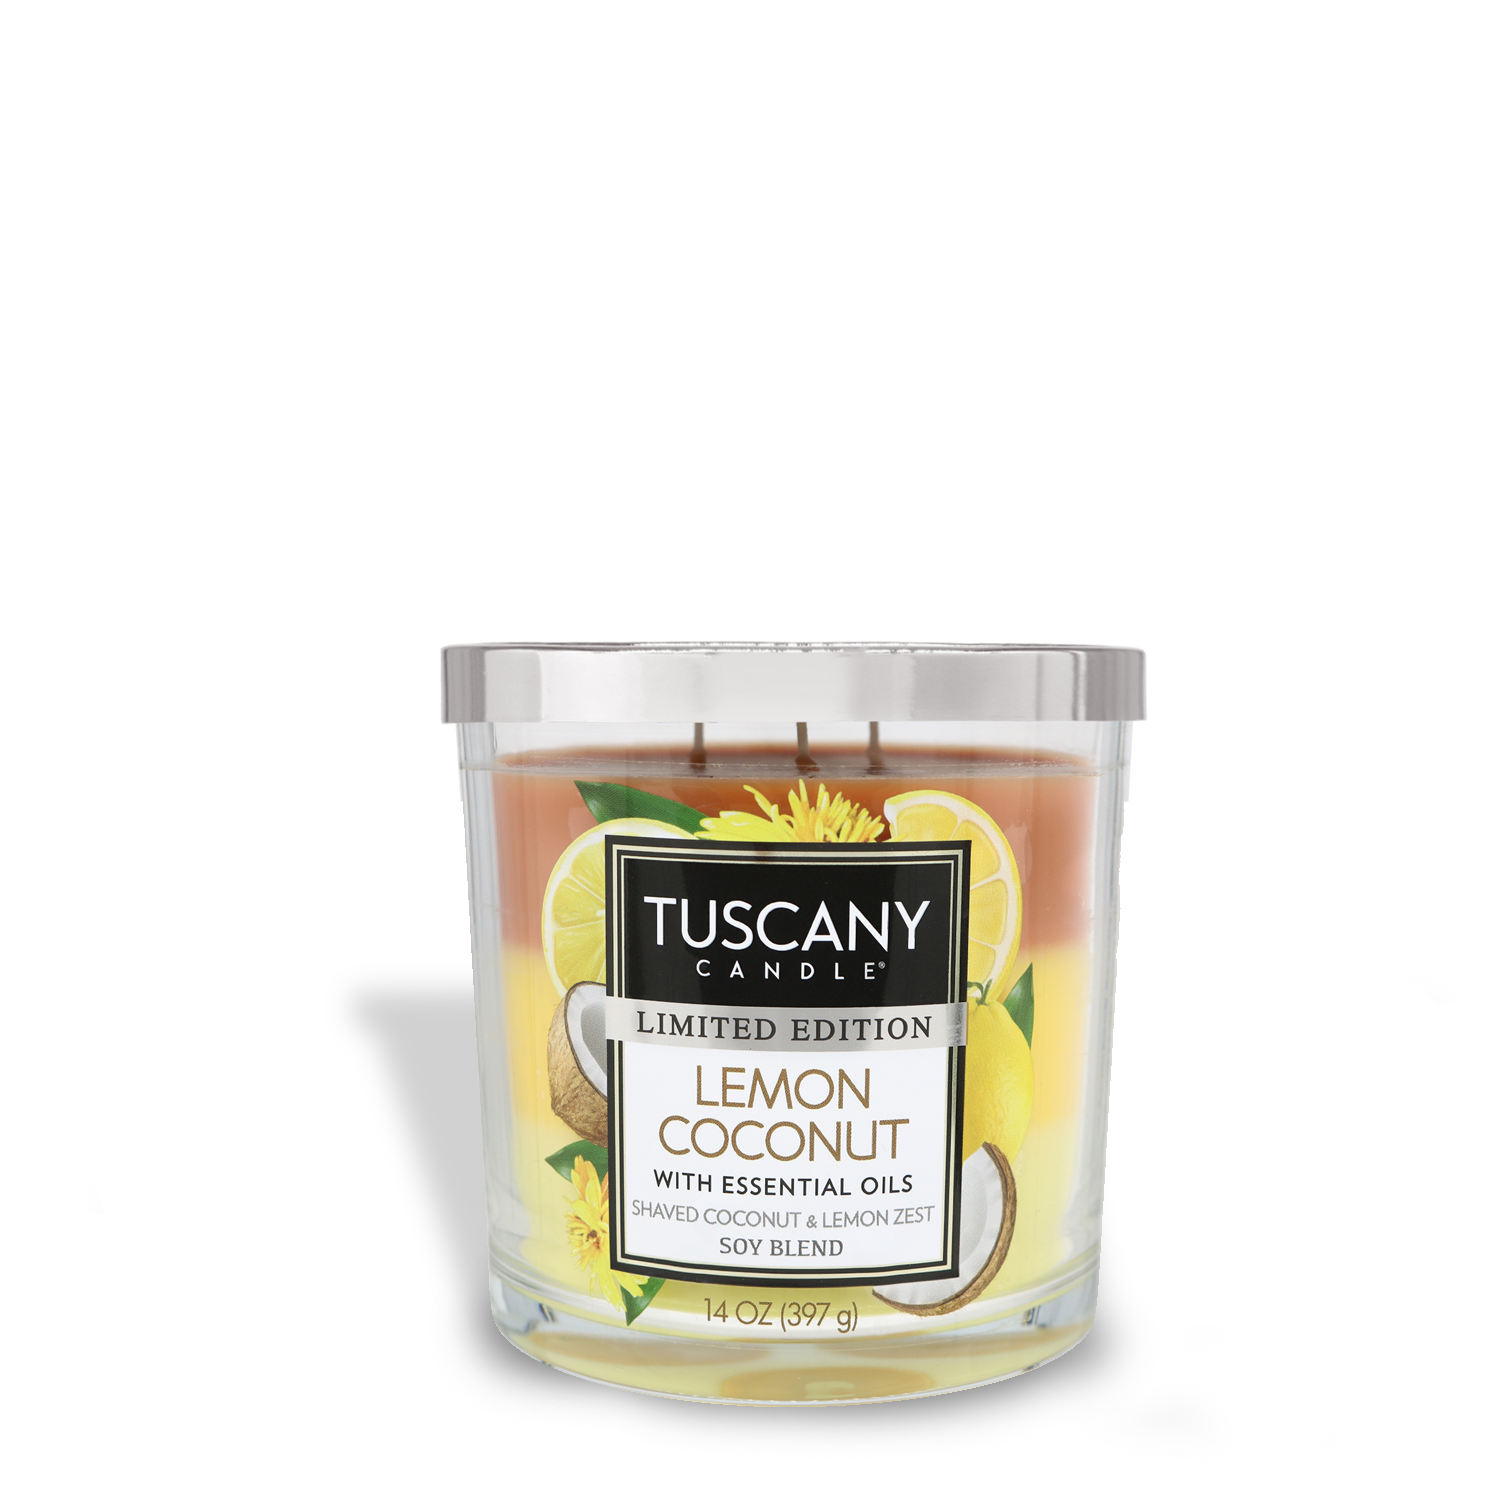 A Tuscany Candle® SEASONAL Lemon Coconut Long-Lasting Scented Jar Candle (14 oz), with essential oils, limited edition, displayed against a white background.